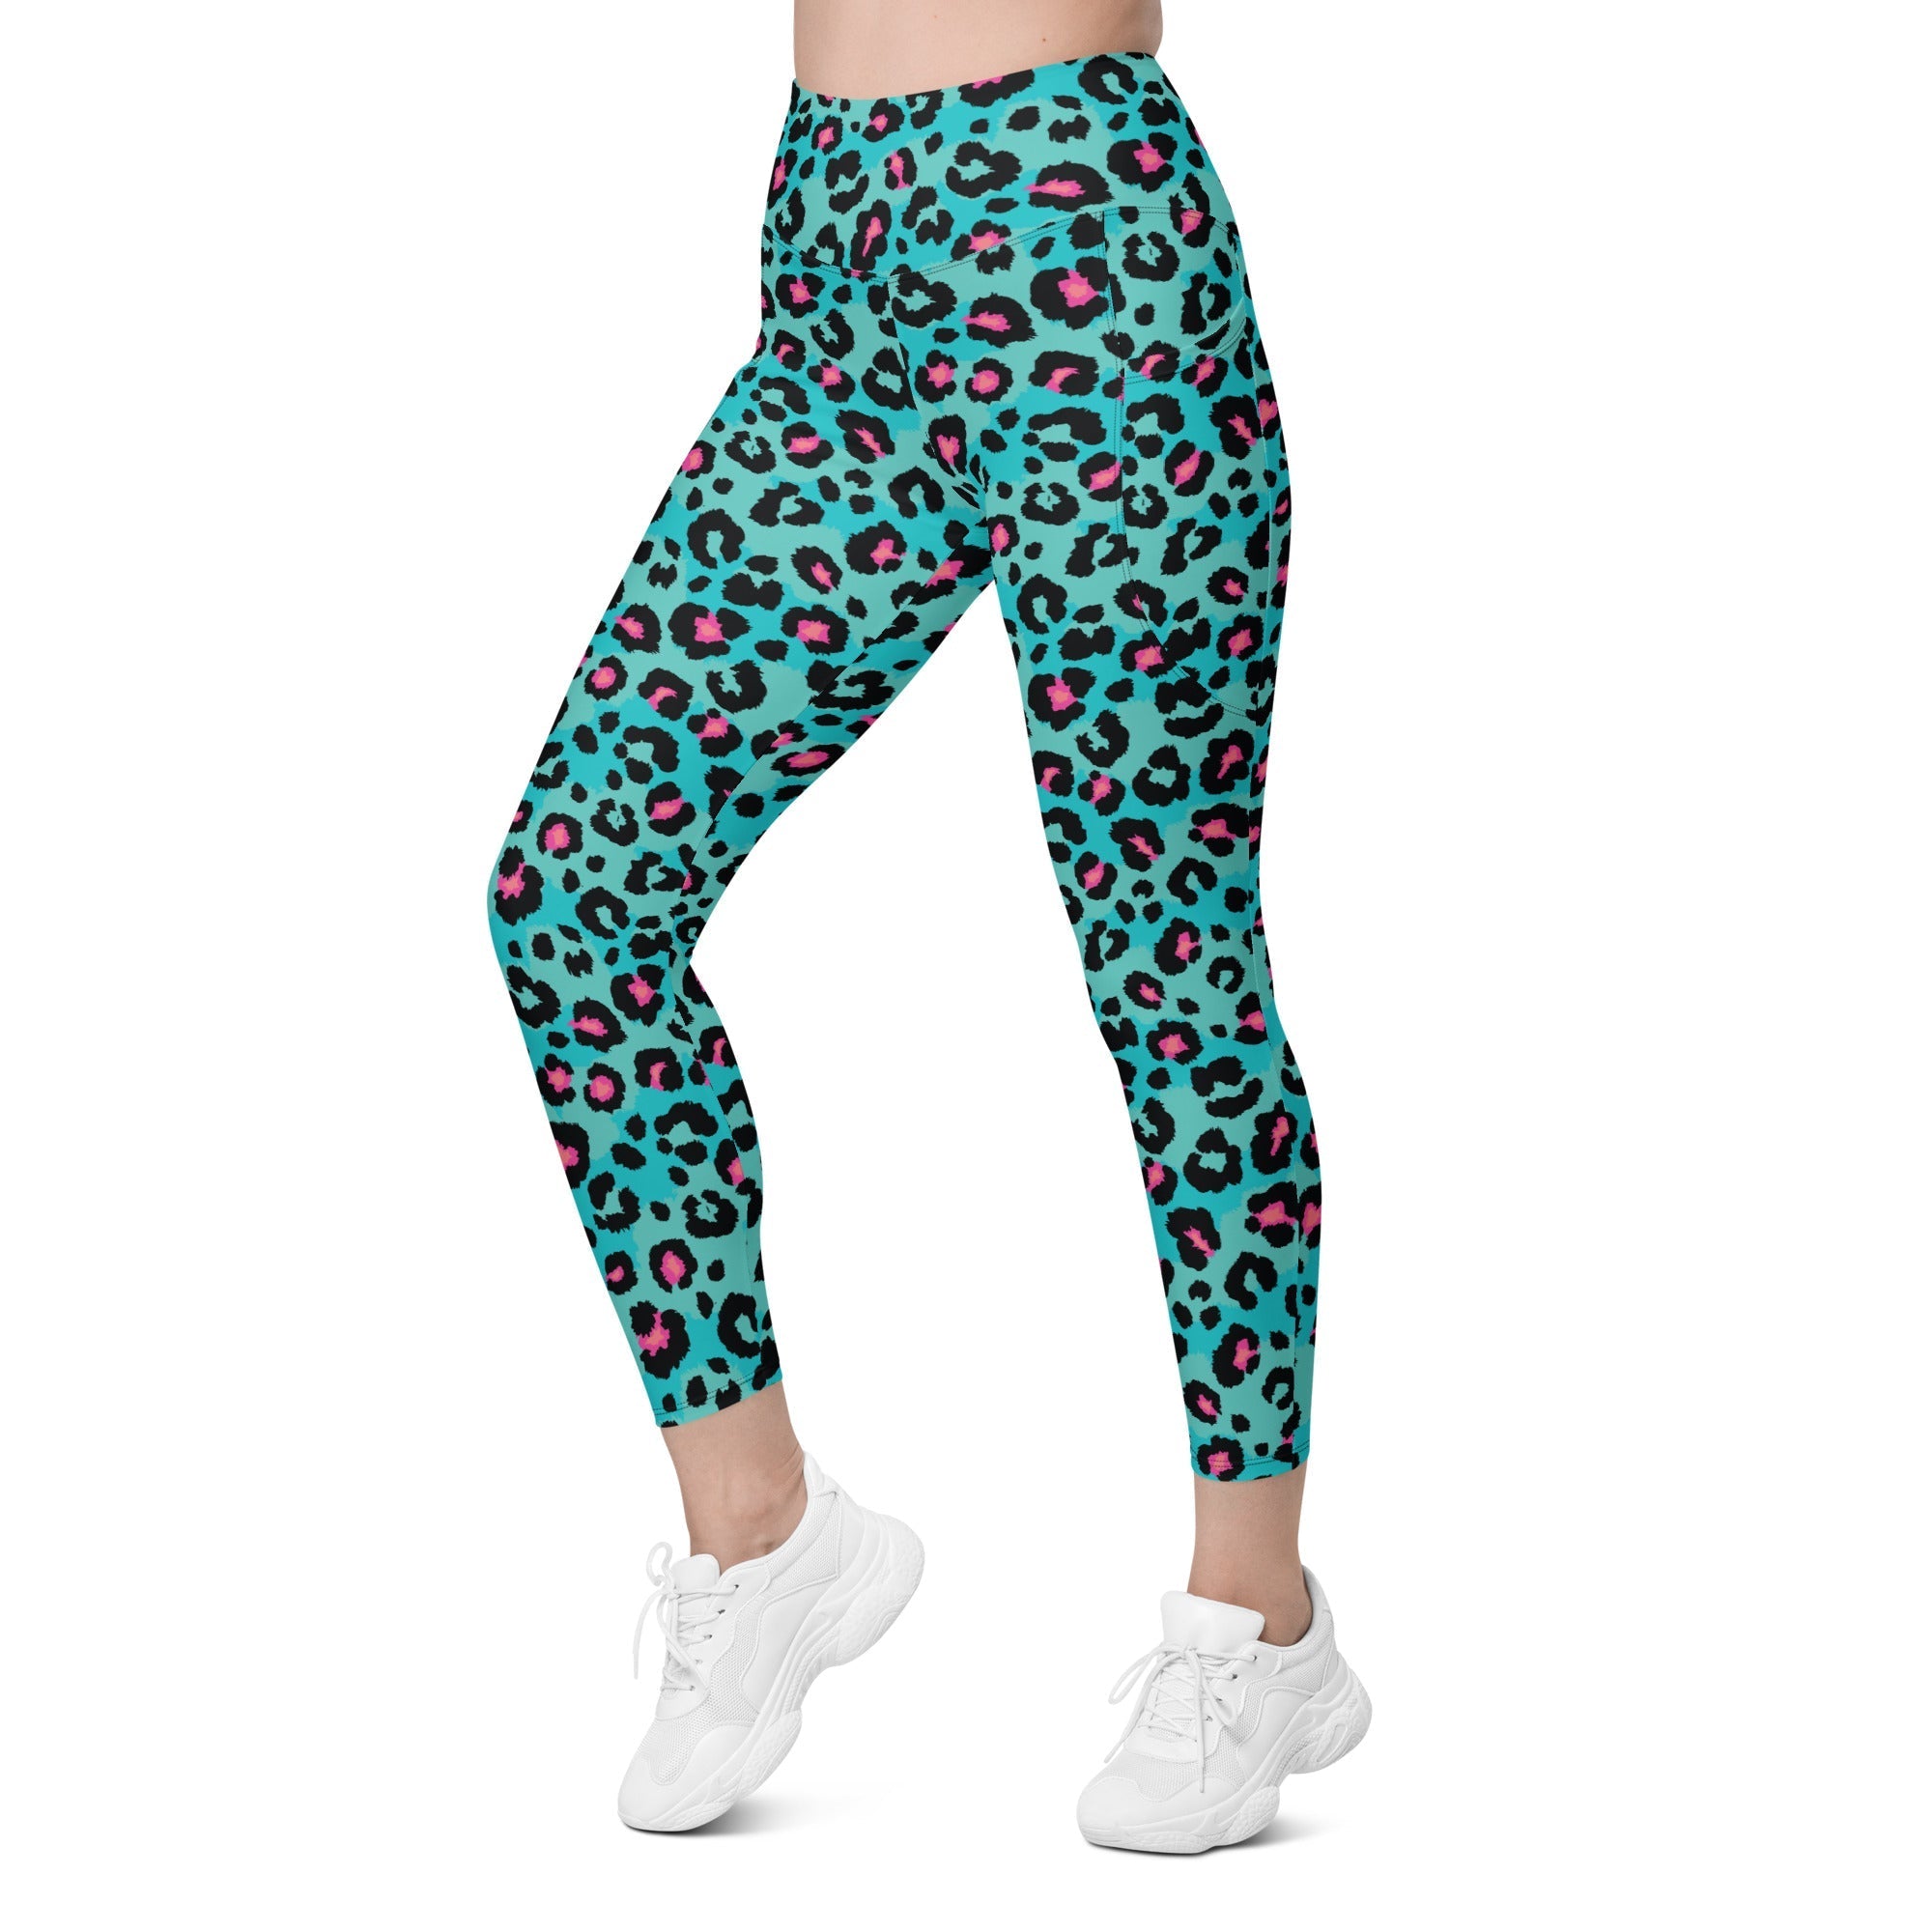 Turquoise Leopard Print Leggings With Pockets